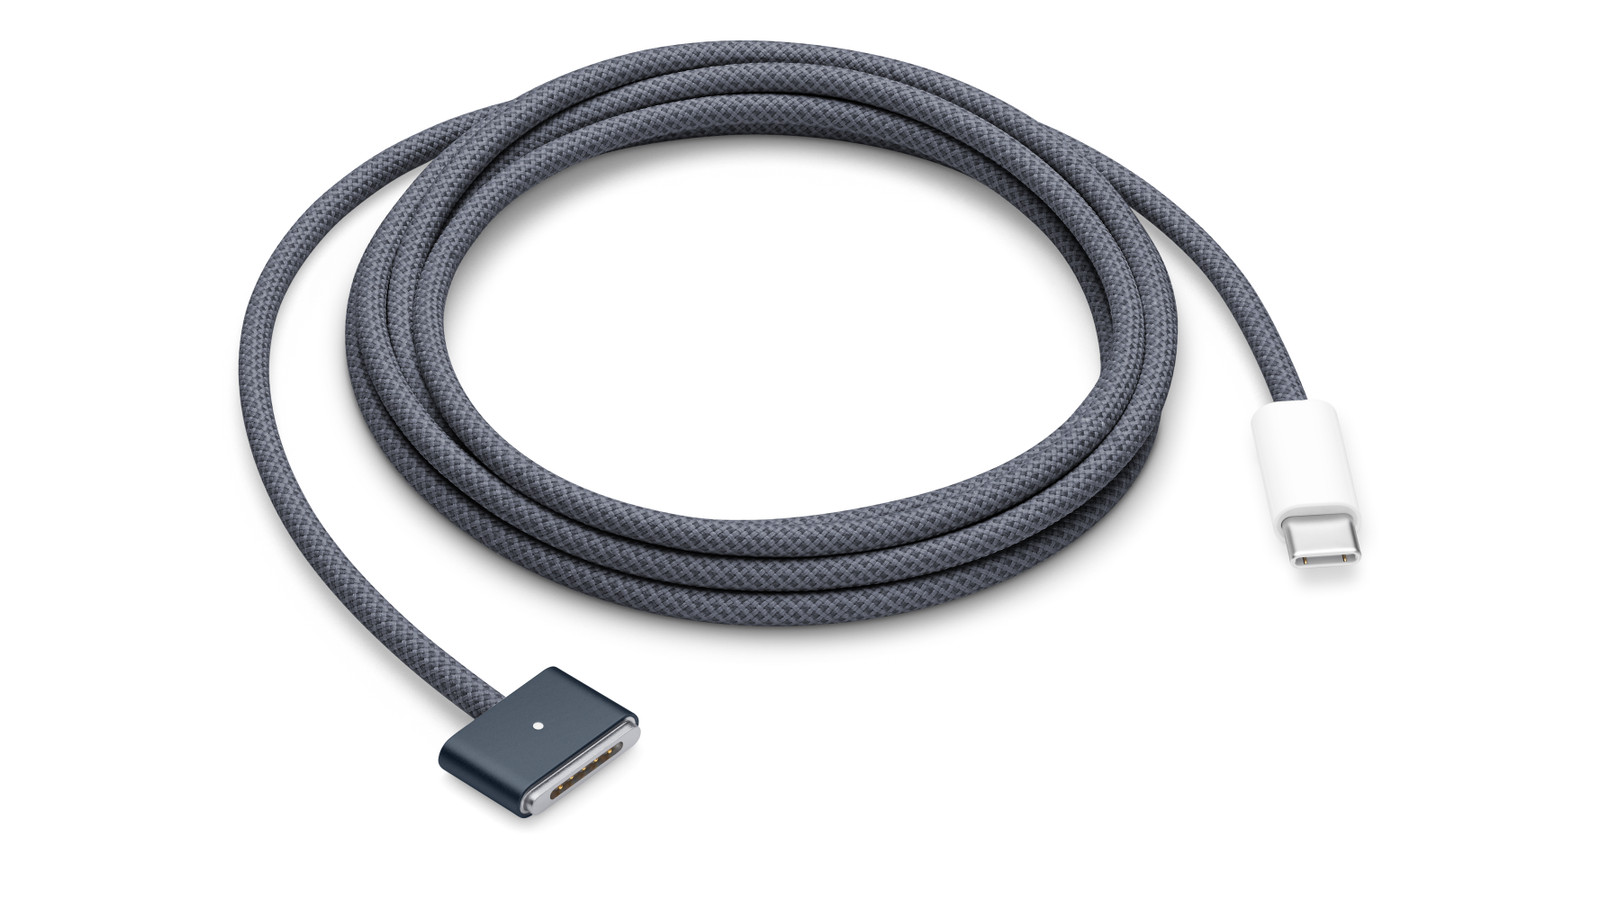 MagSafe 3 Charging Cable Now Available in New Colors Matching MacBook Air